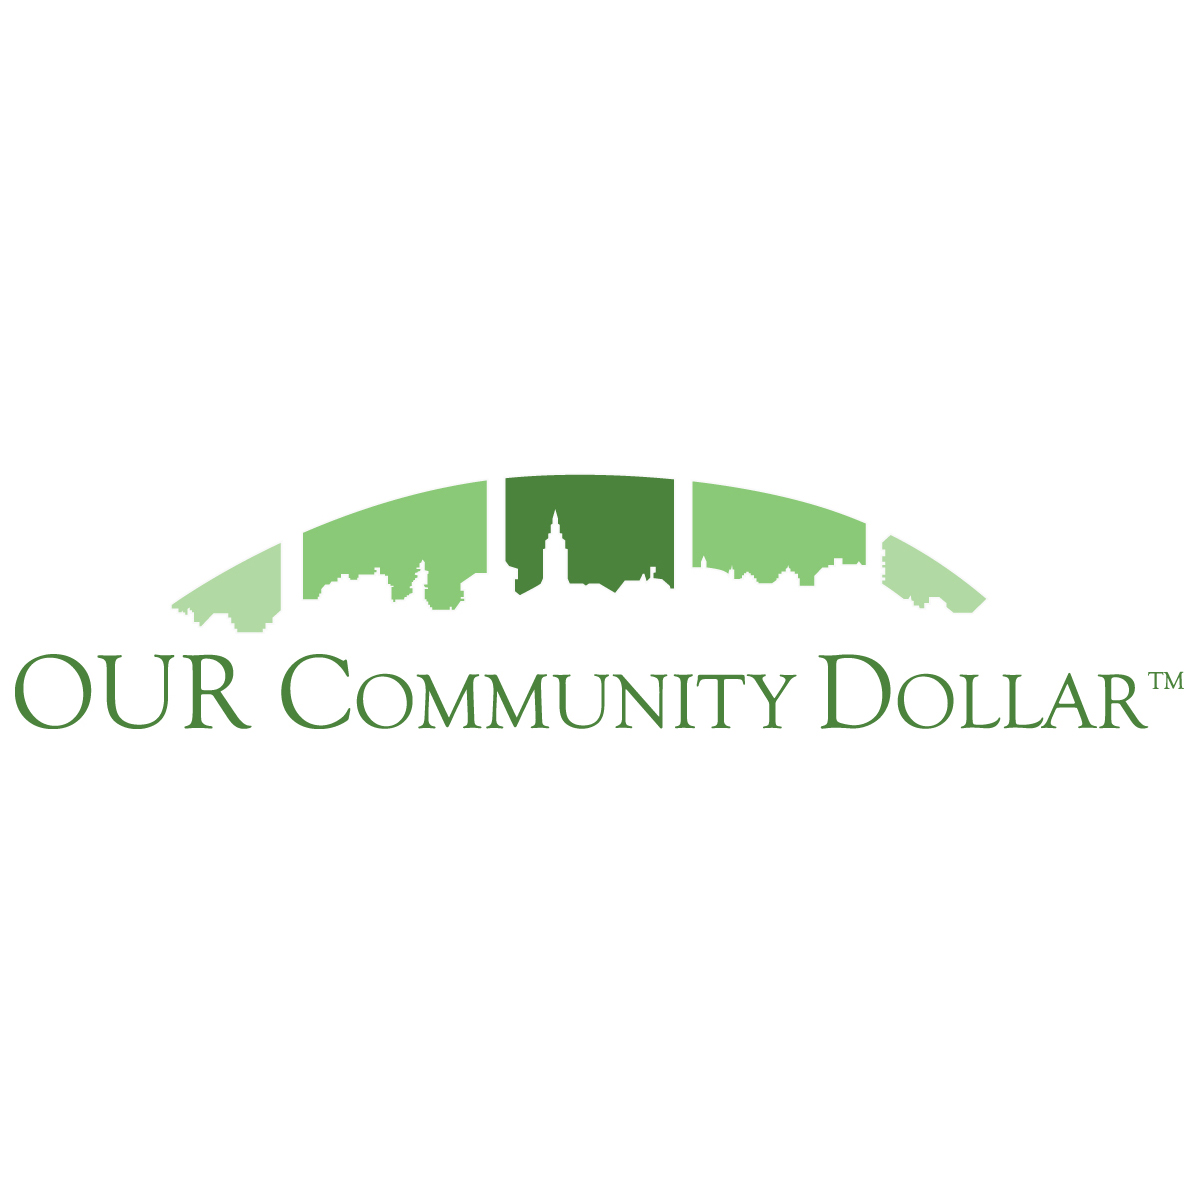 OUR Community Dollar SQUARE